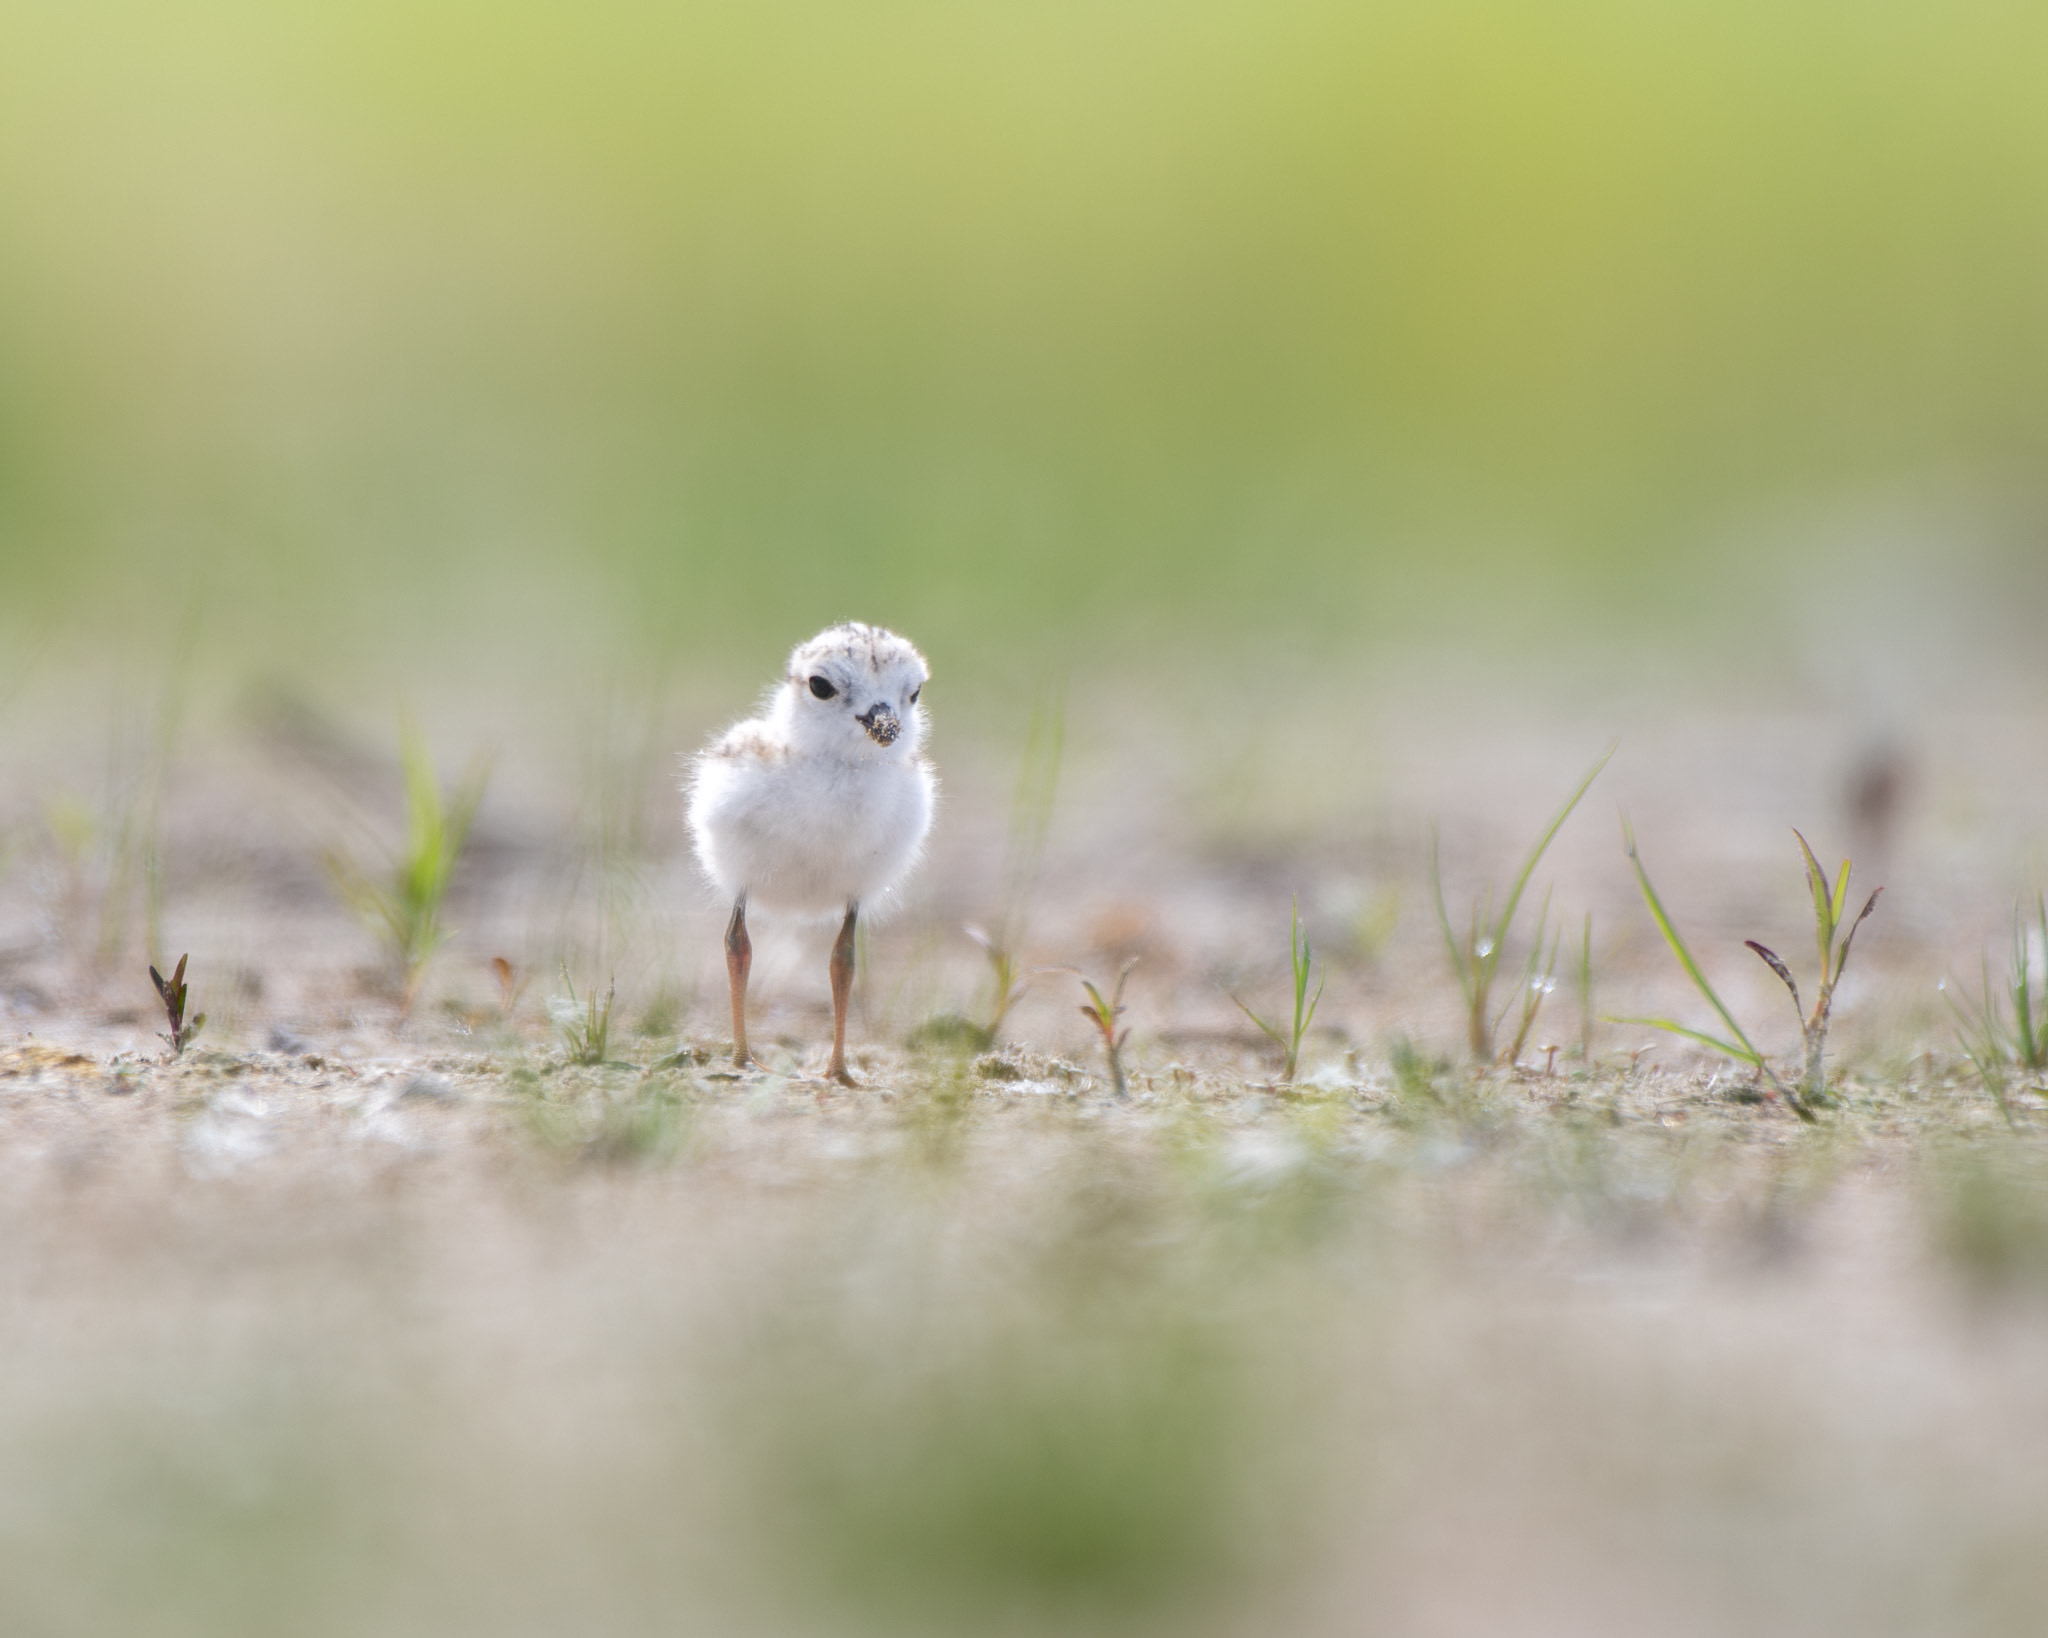 A newfly fledged Piping Plover stands alone on a sparsely vegetated beach.